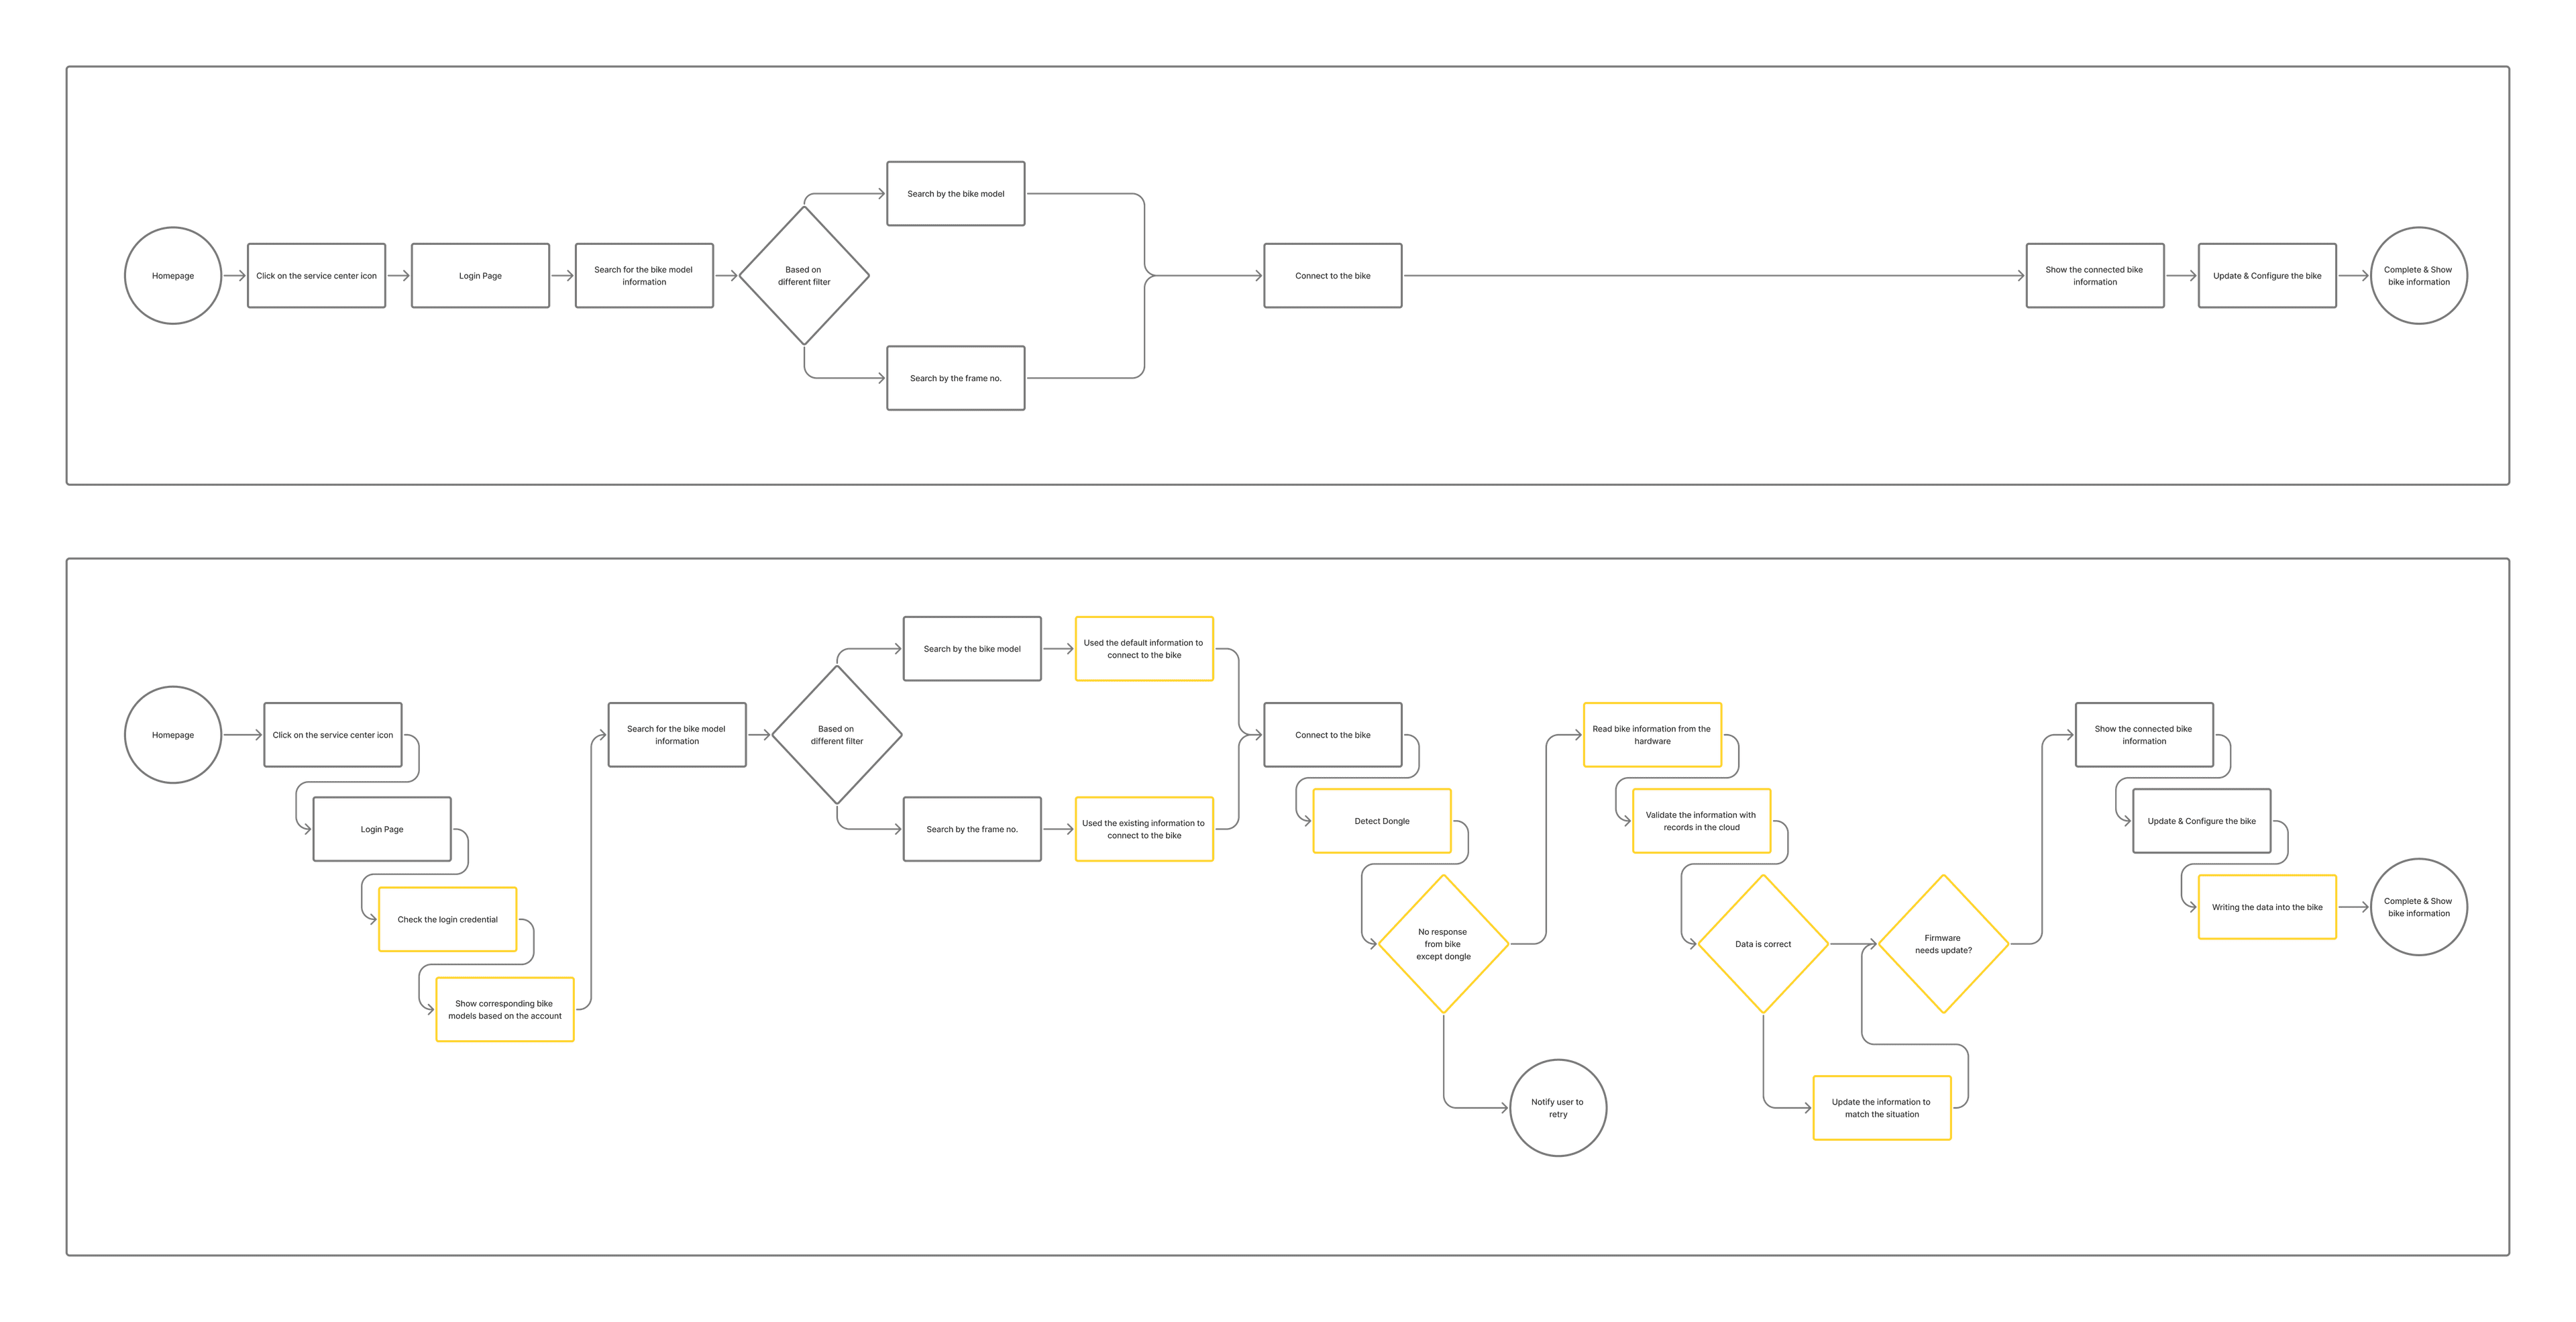 The comparison between the user flow and the system process flow